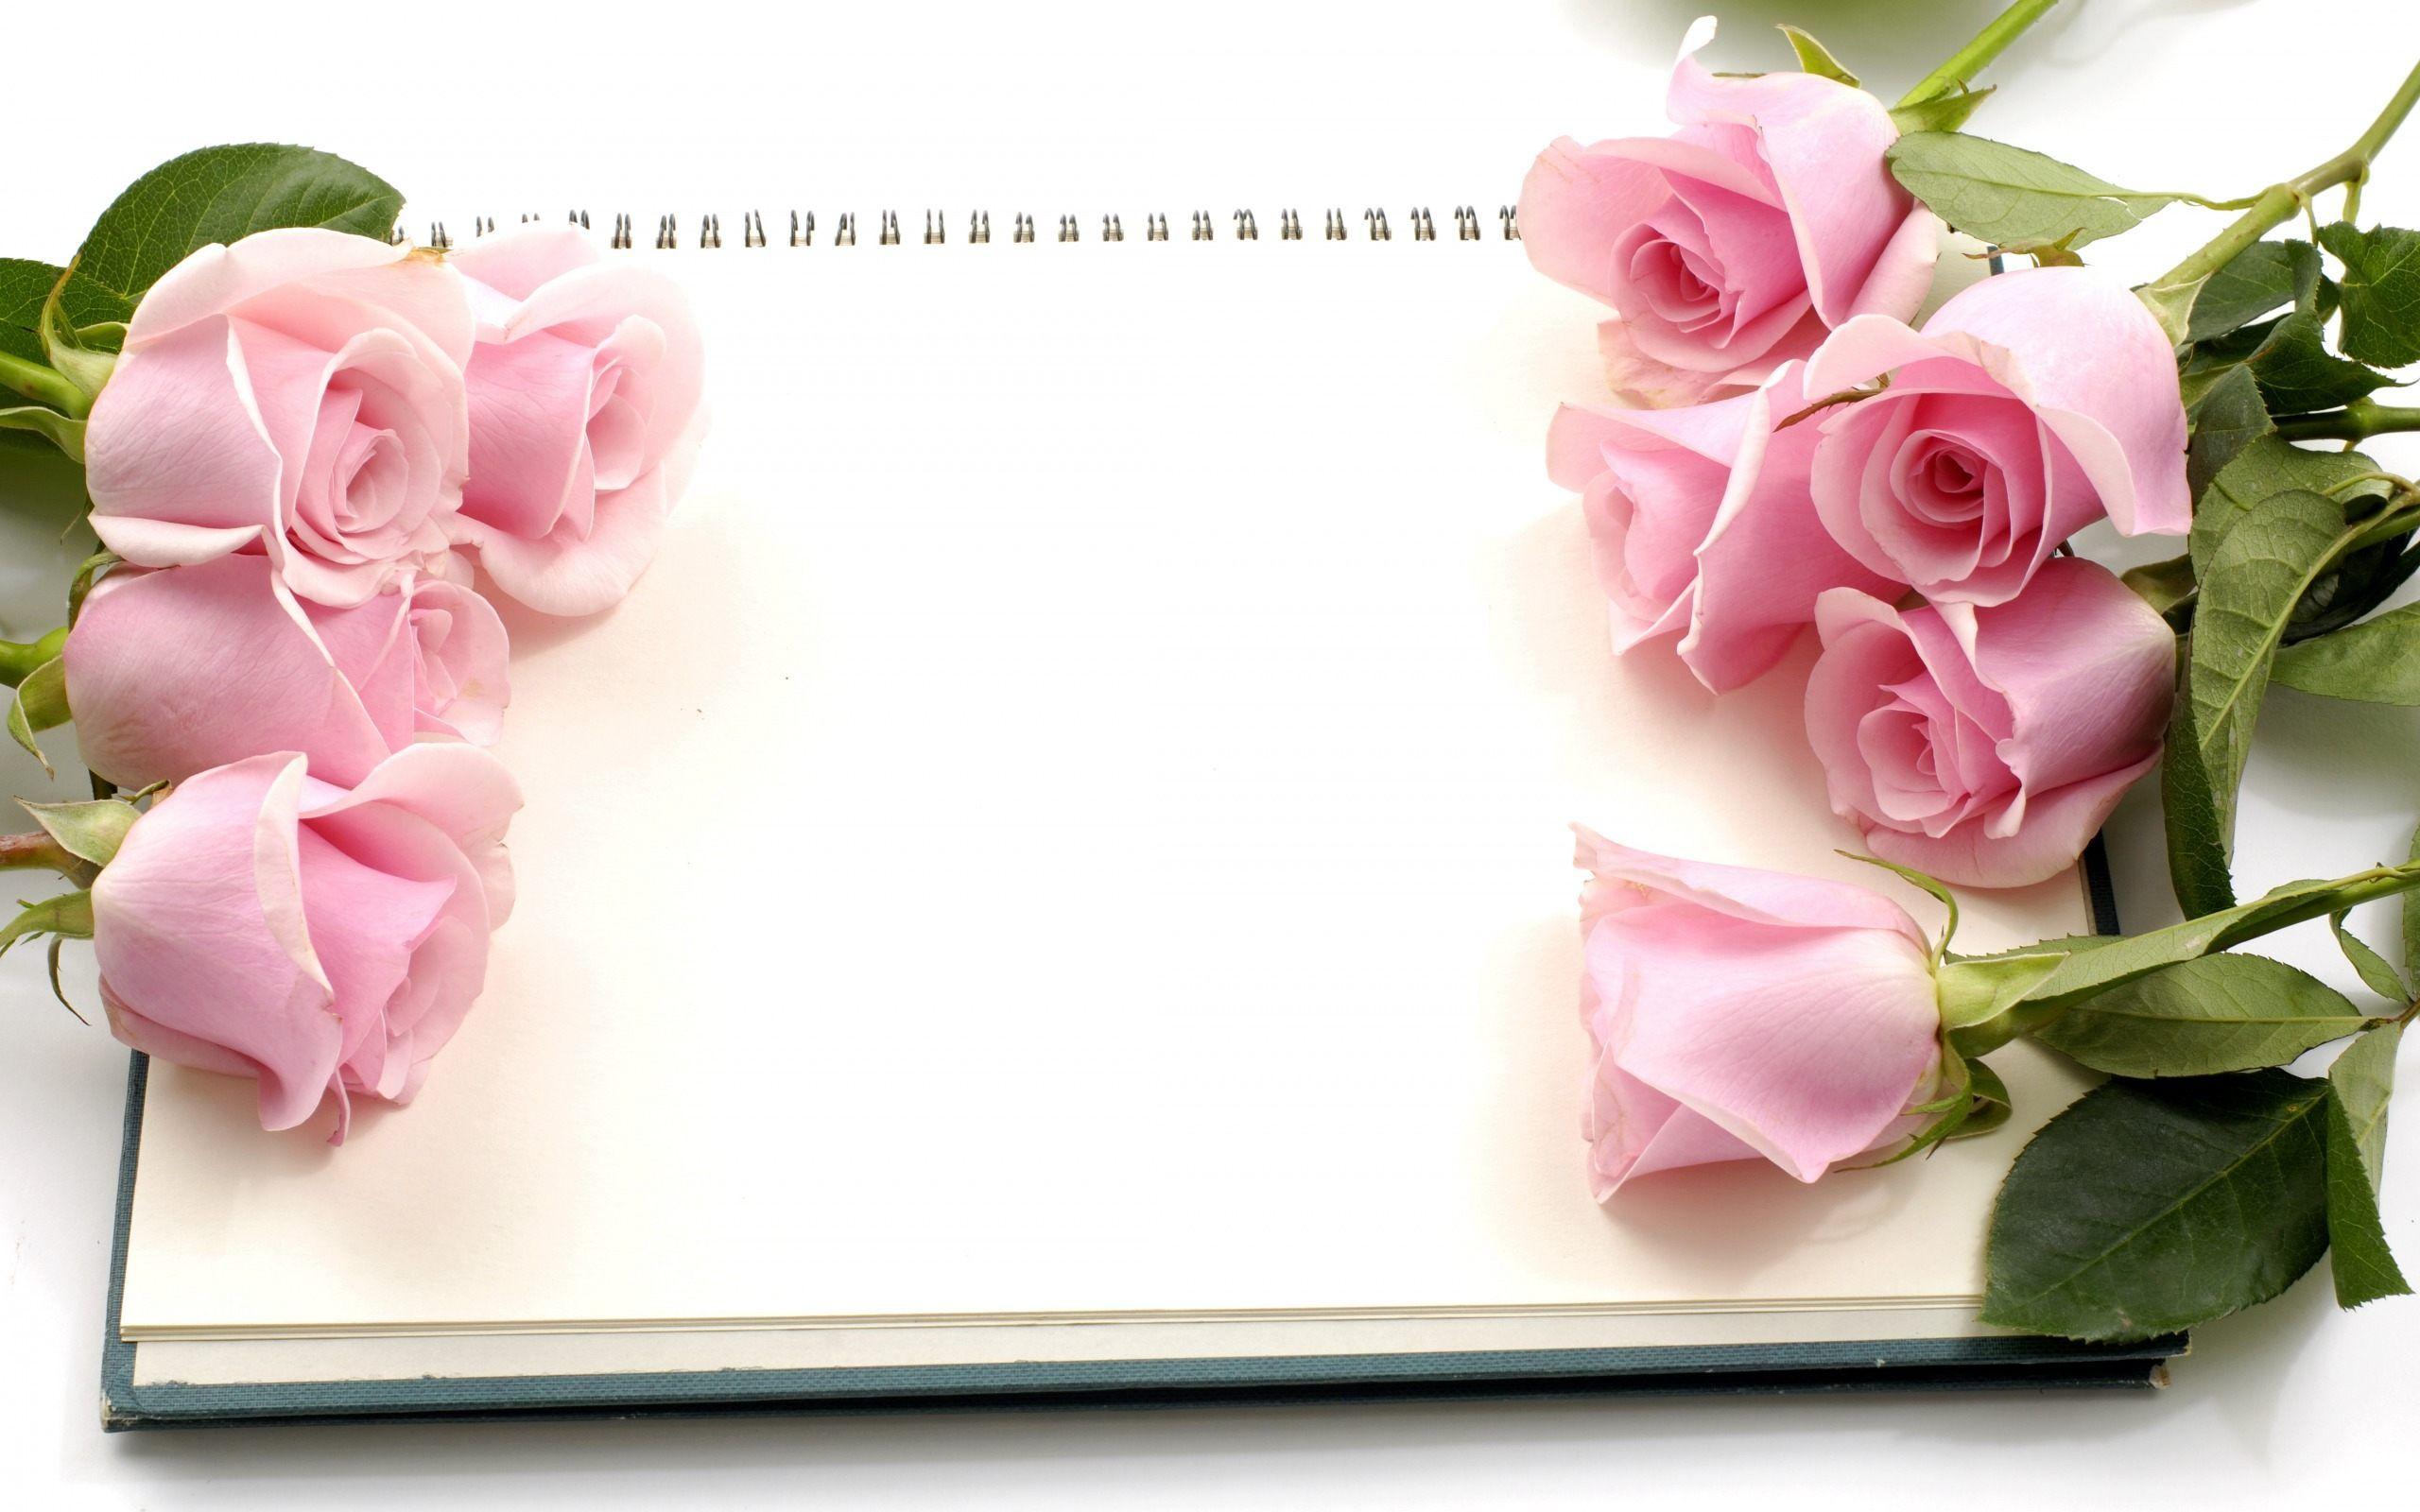 Pink Roses Flowers and Diary Wallpaper. HD Desktop Background